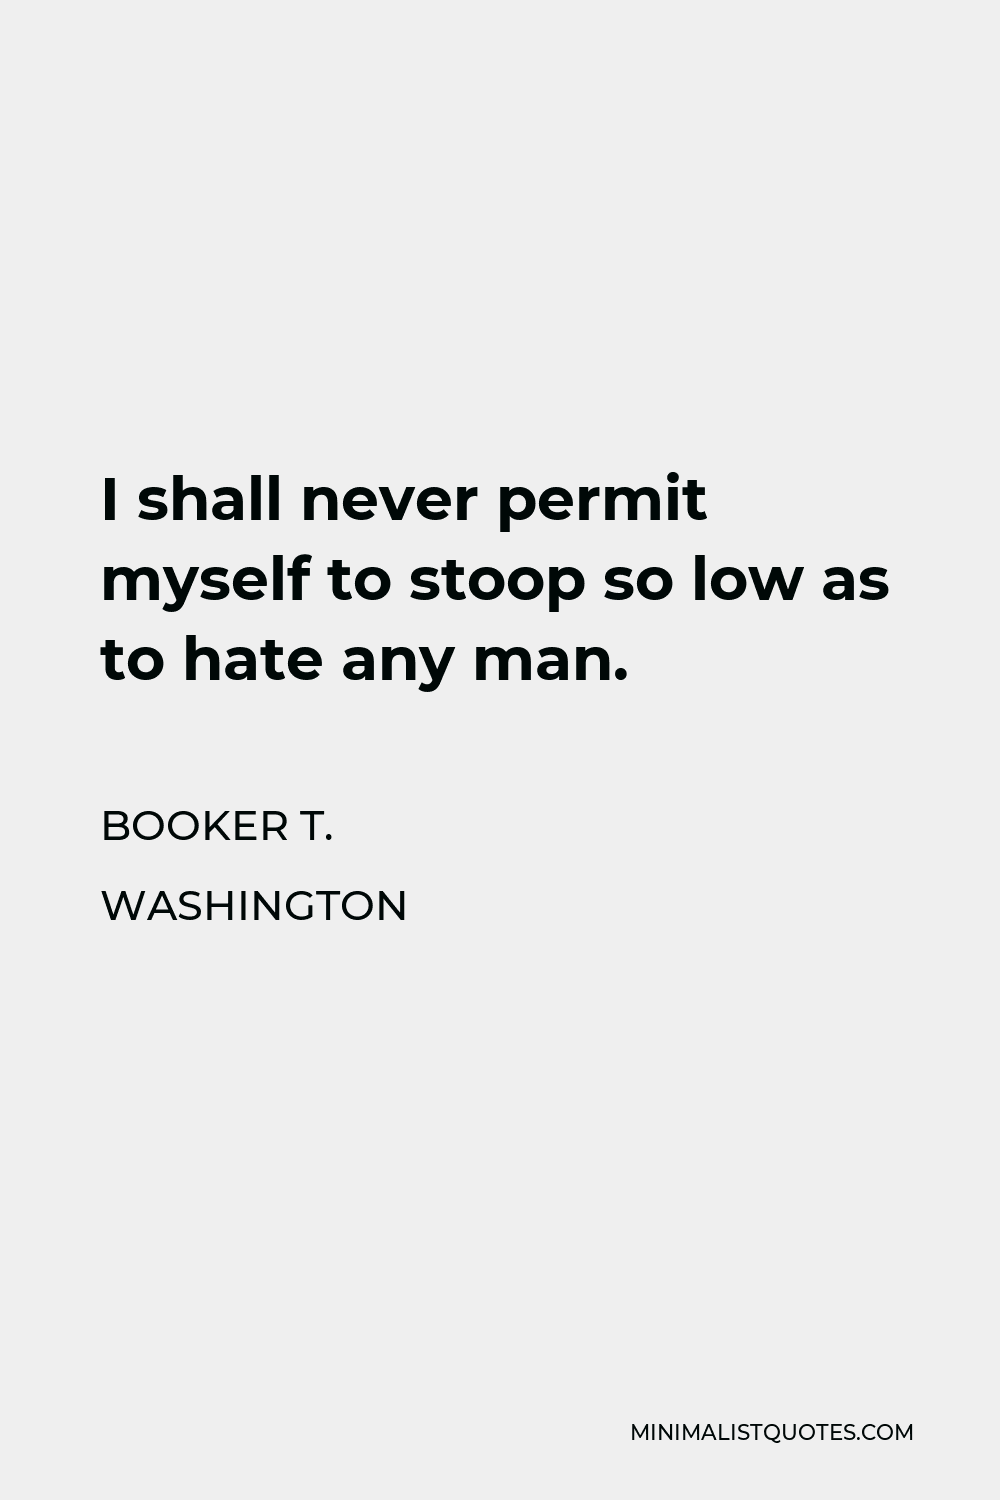 Booker T. Washington Quote - I shall never permit myself to stoop so low as to hate any man.